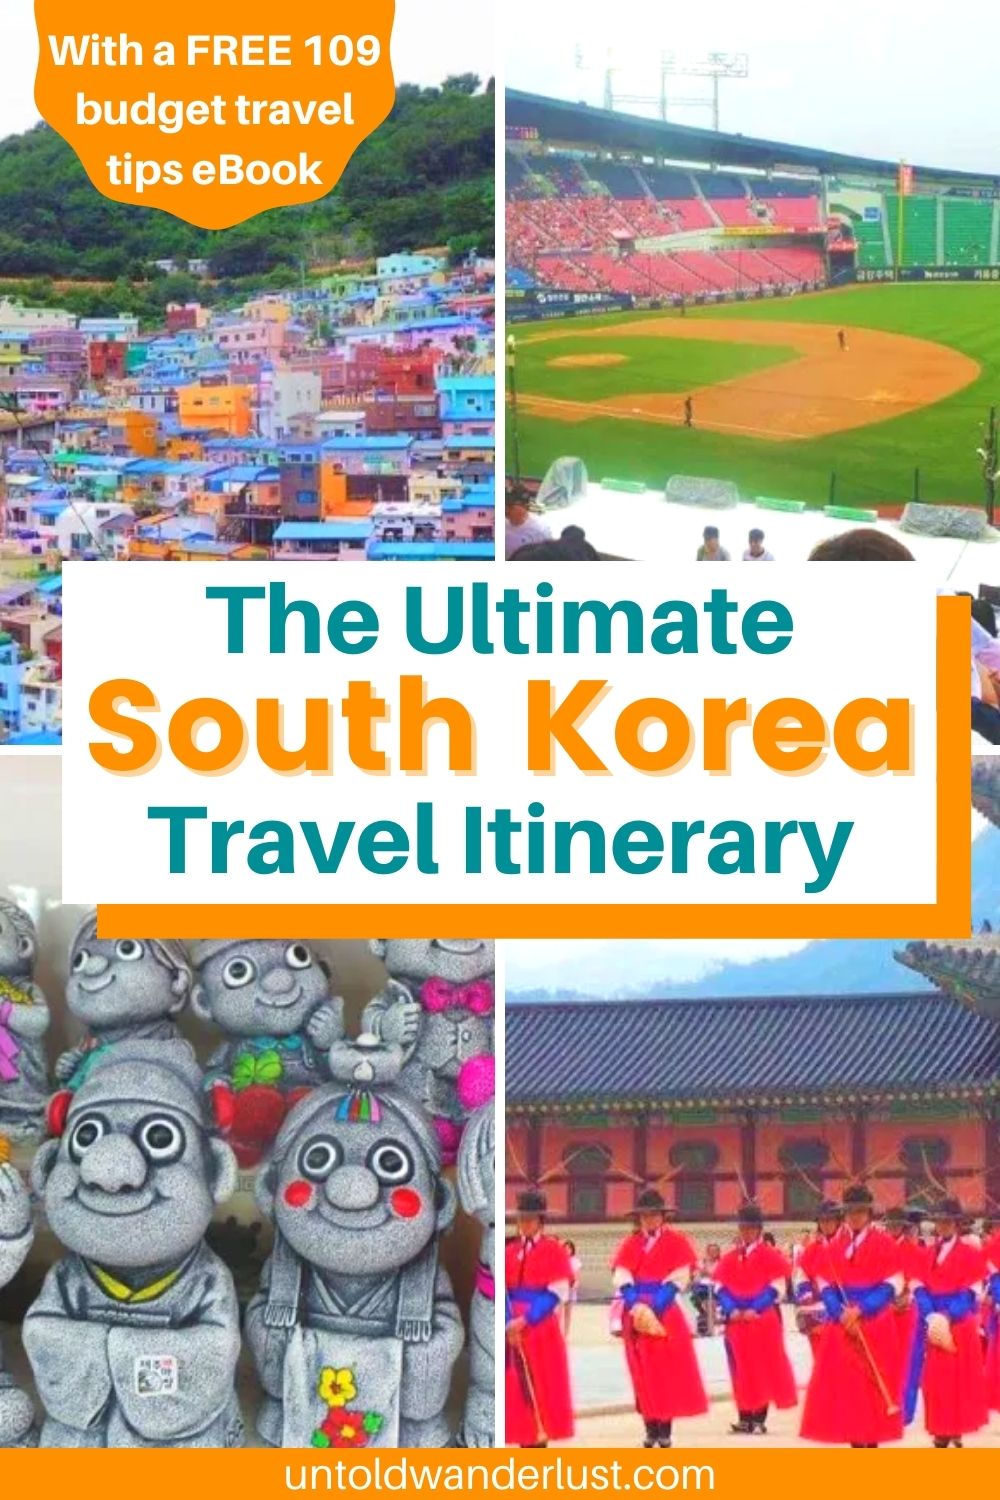 The Ultimate South Korea Travel Itinerary